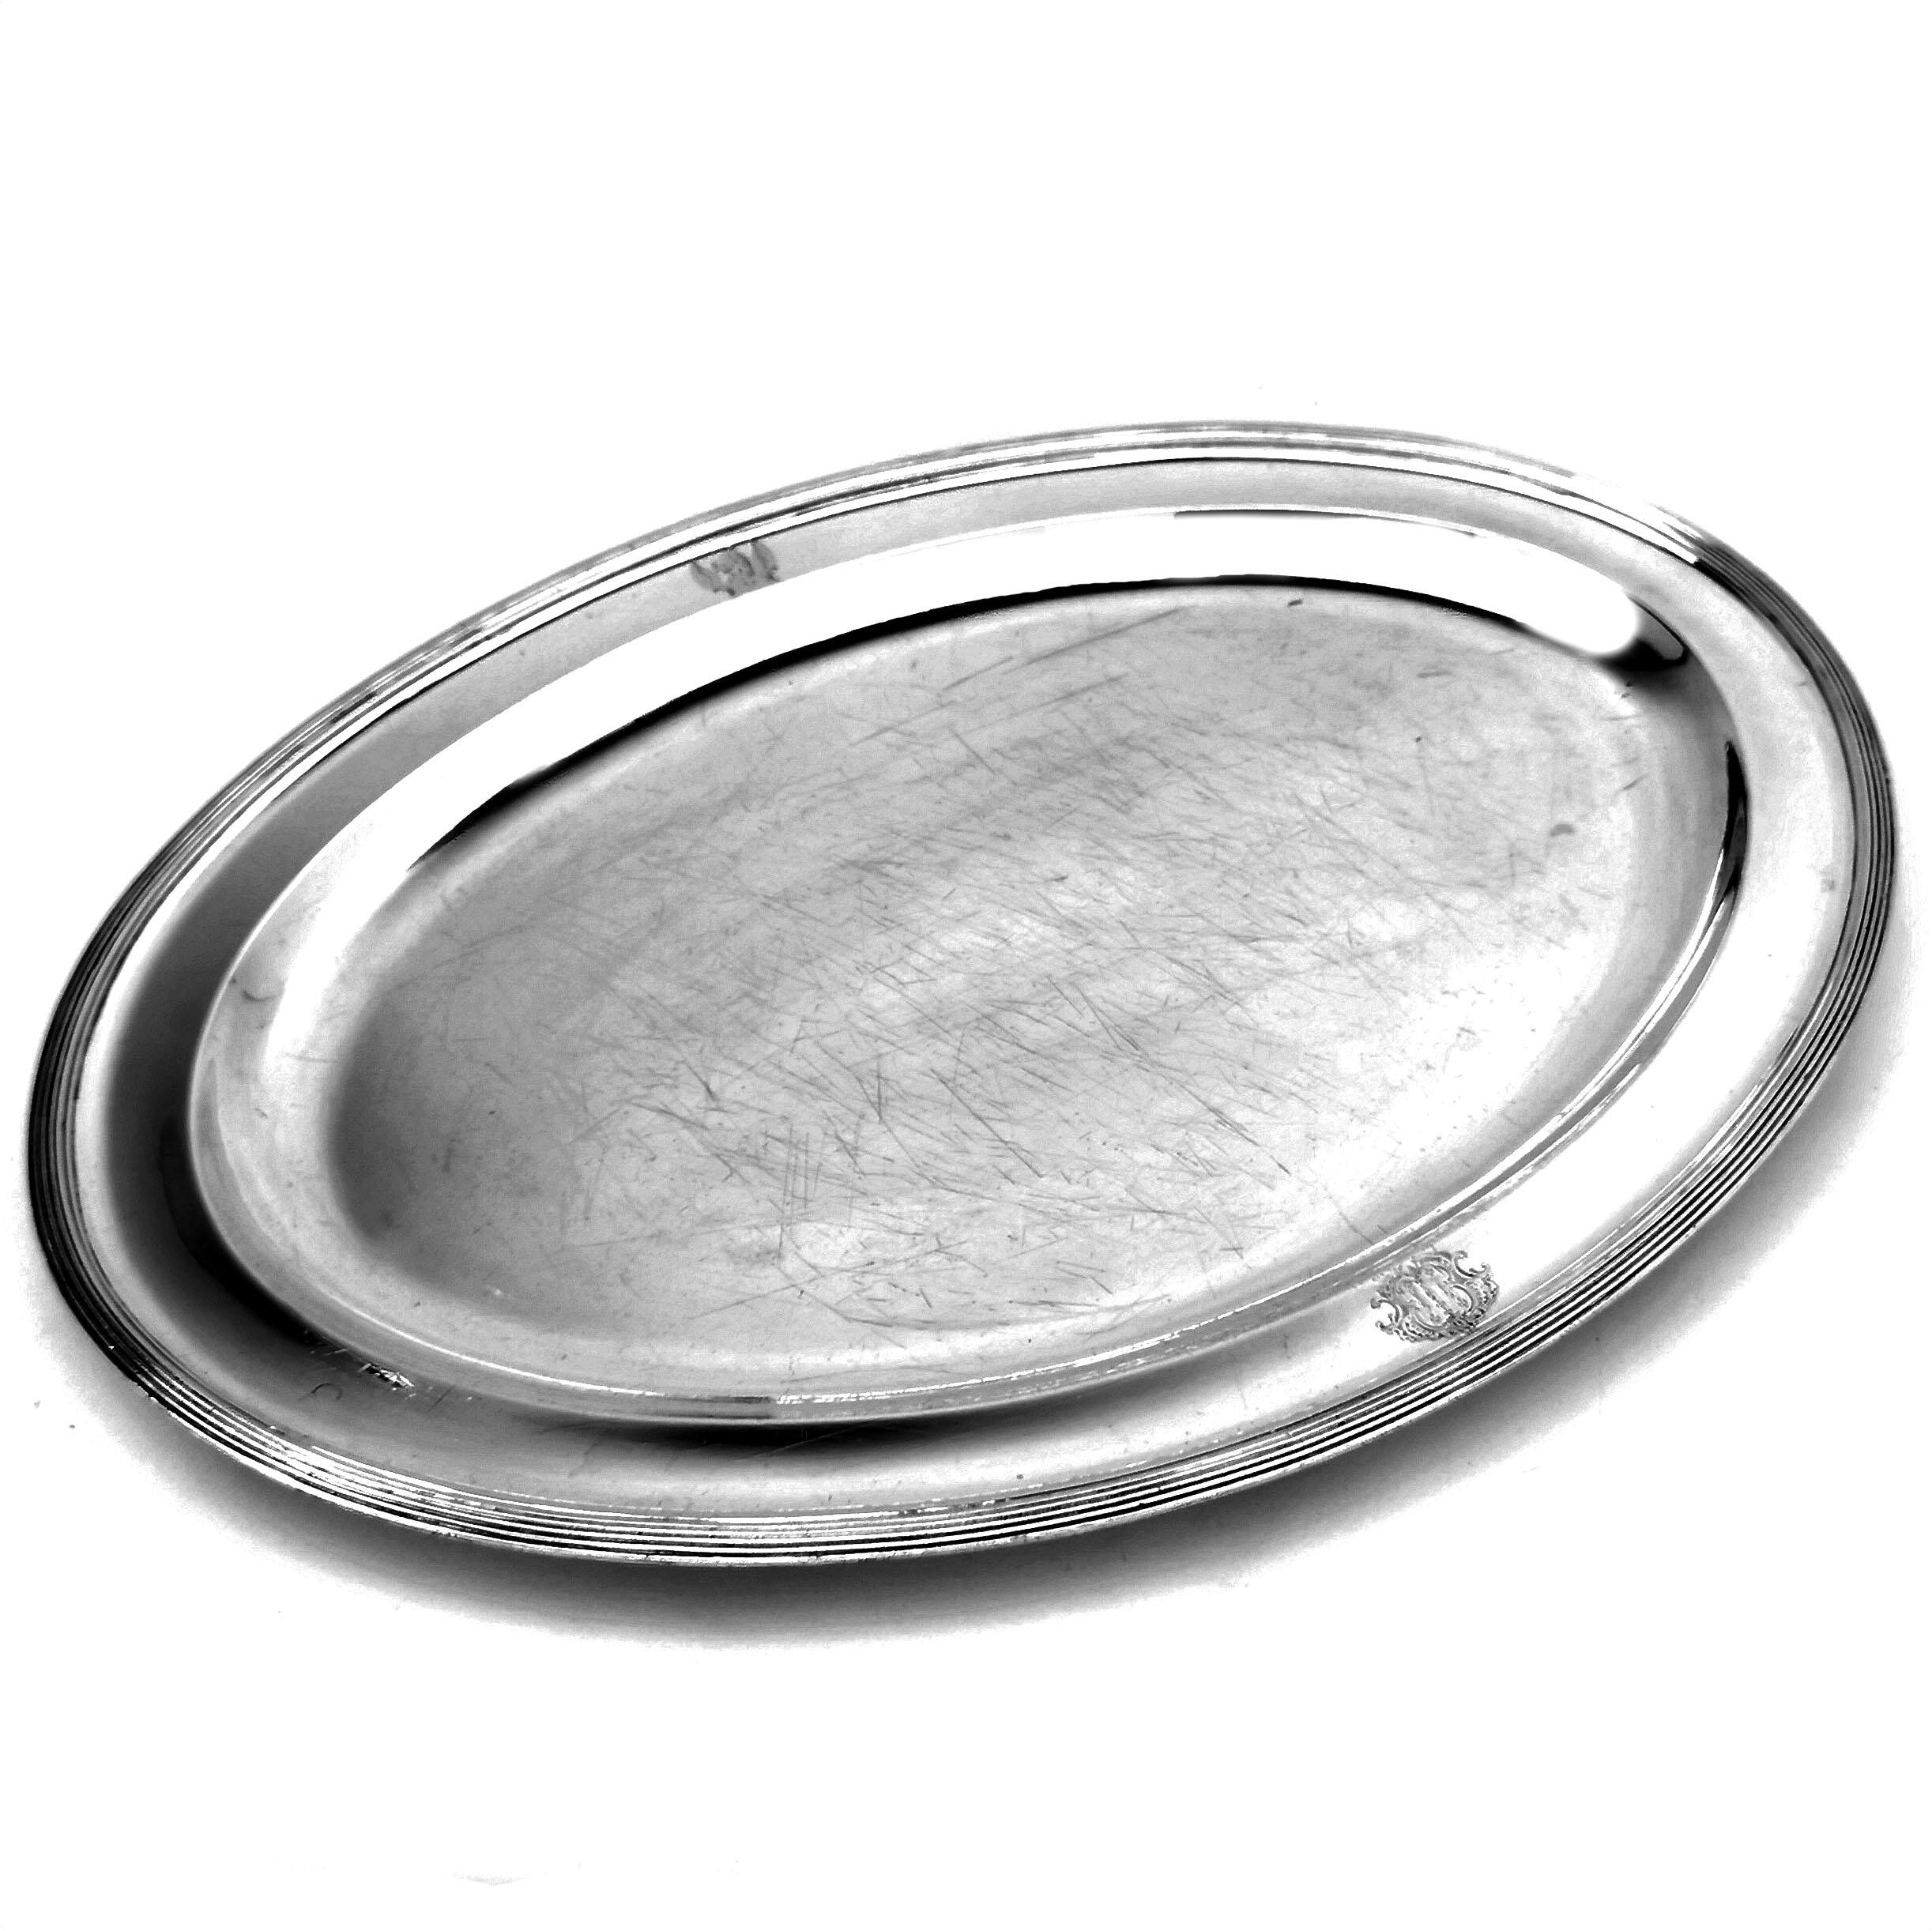 English Antique Georgian Oval Sterling Silver Meat Platter / Serving Dish 1804